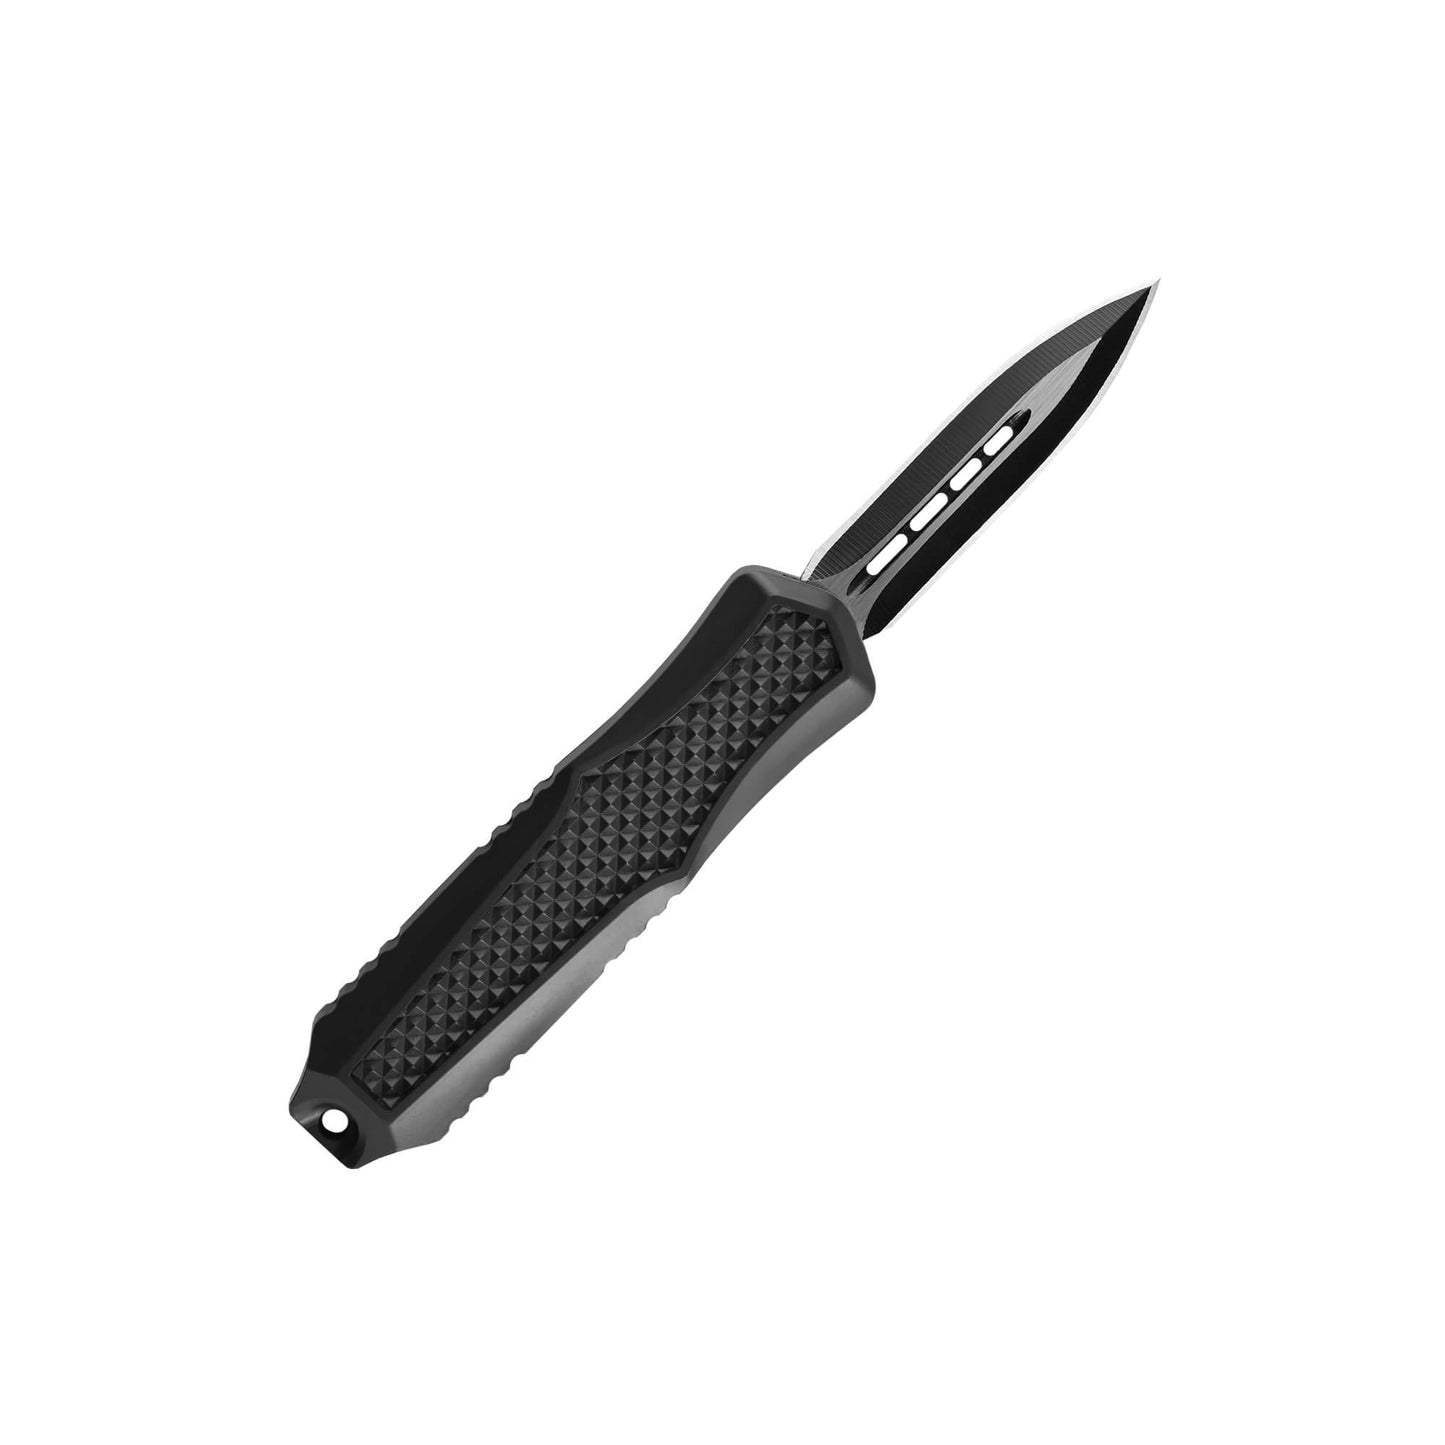 Black Automatic OTF knife Relik from Mavik Gear with spear point blade, Zinc alloy handle, button lock and lanyard hole.